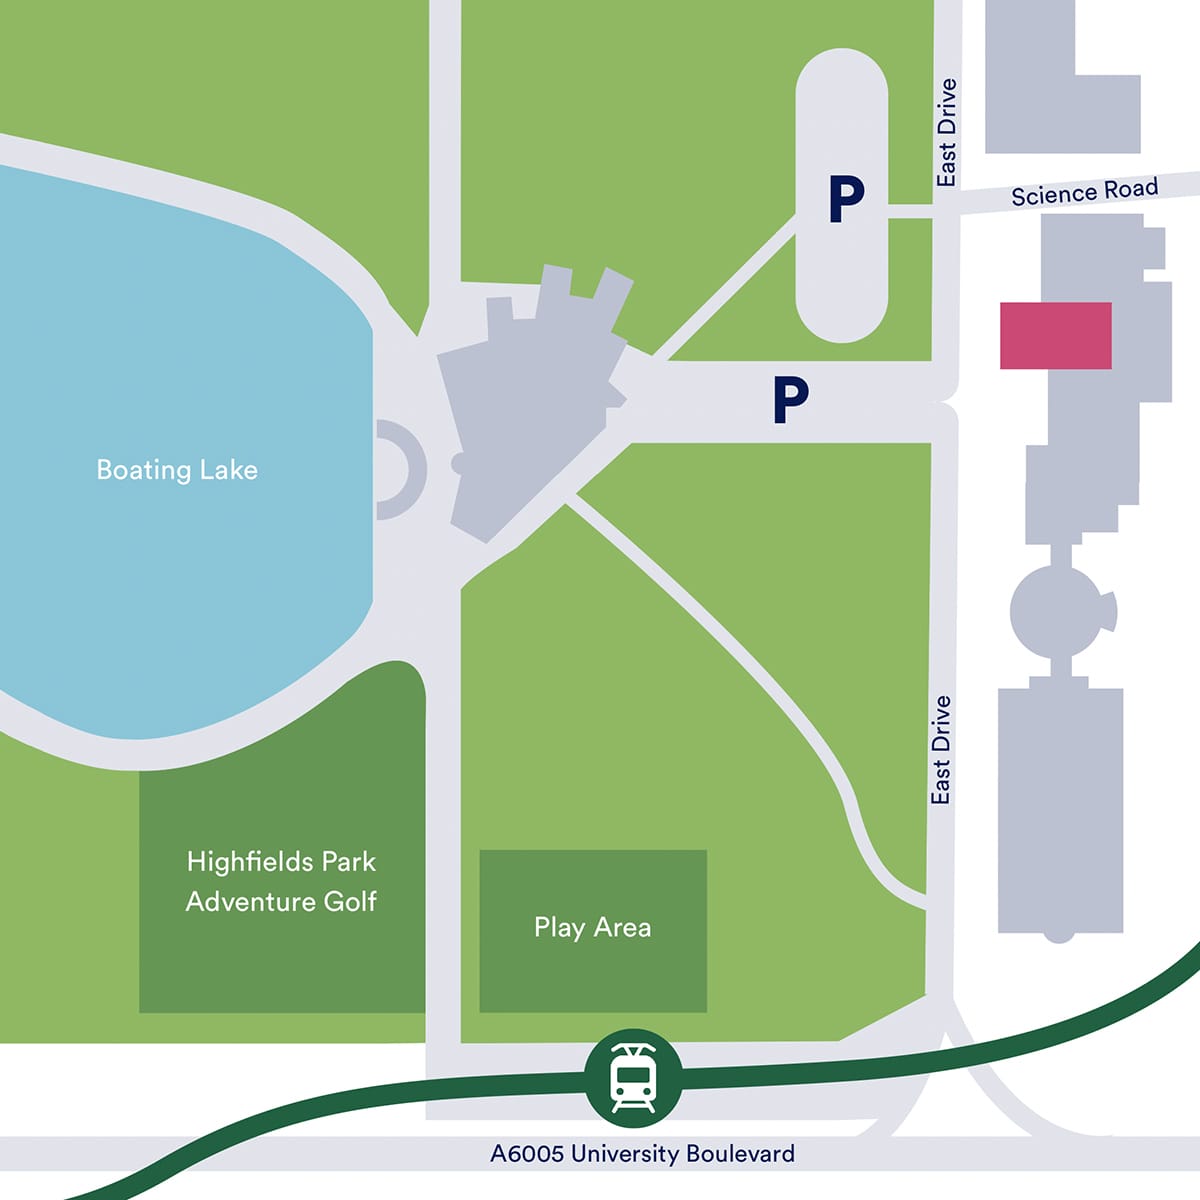 A map showing where the Djanogly Recital Hall is located in relation to Lakeside Arts' buildings and the surrounding parkland.